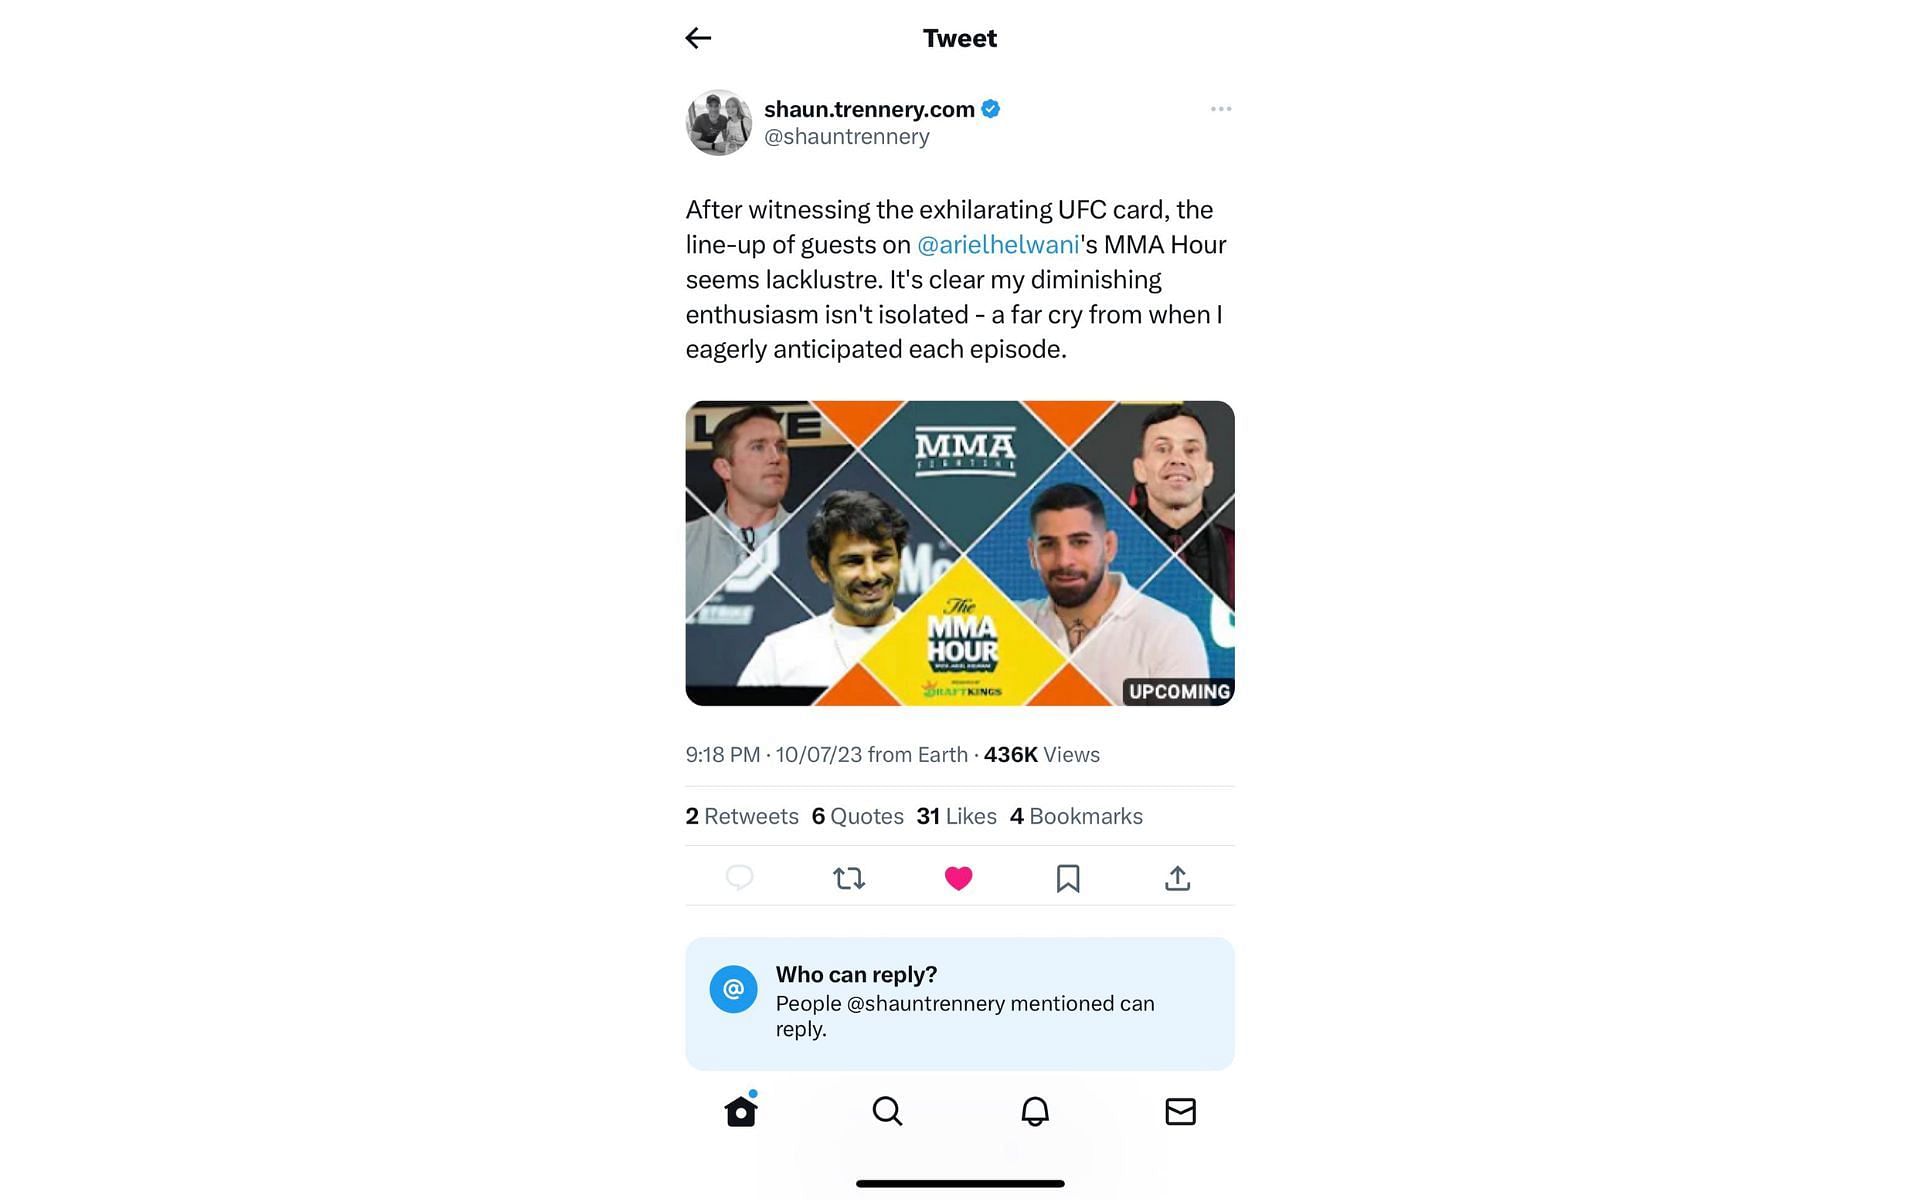 Deleted tweet on The MMA Hour guests lineup